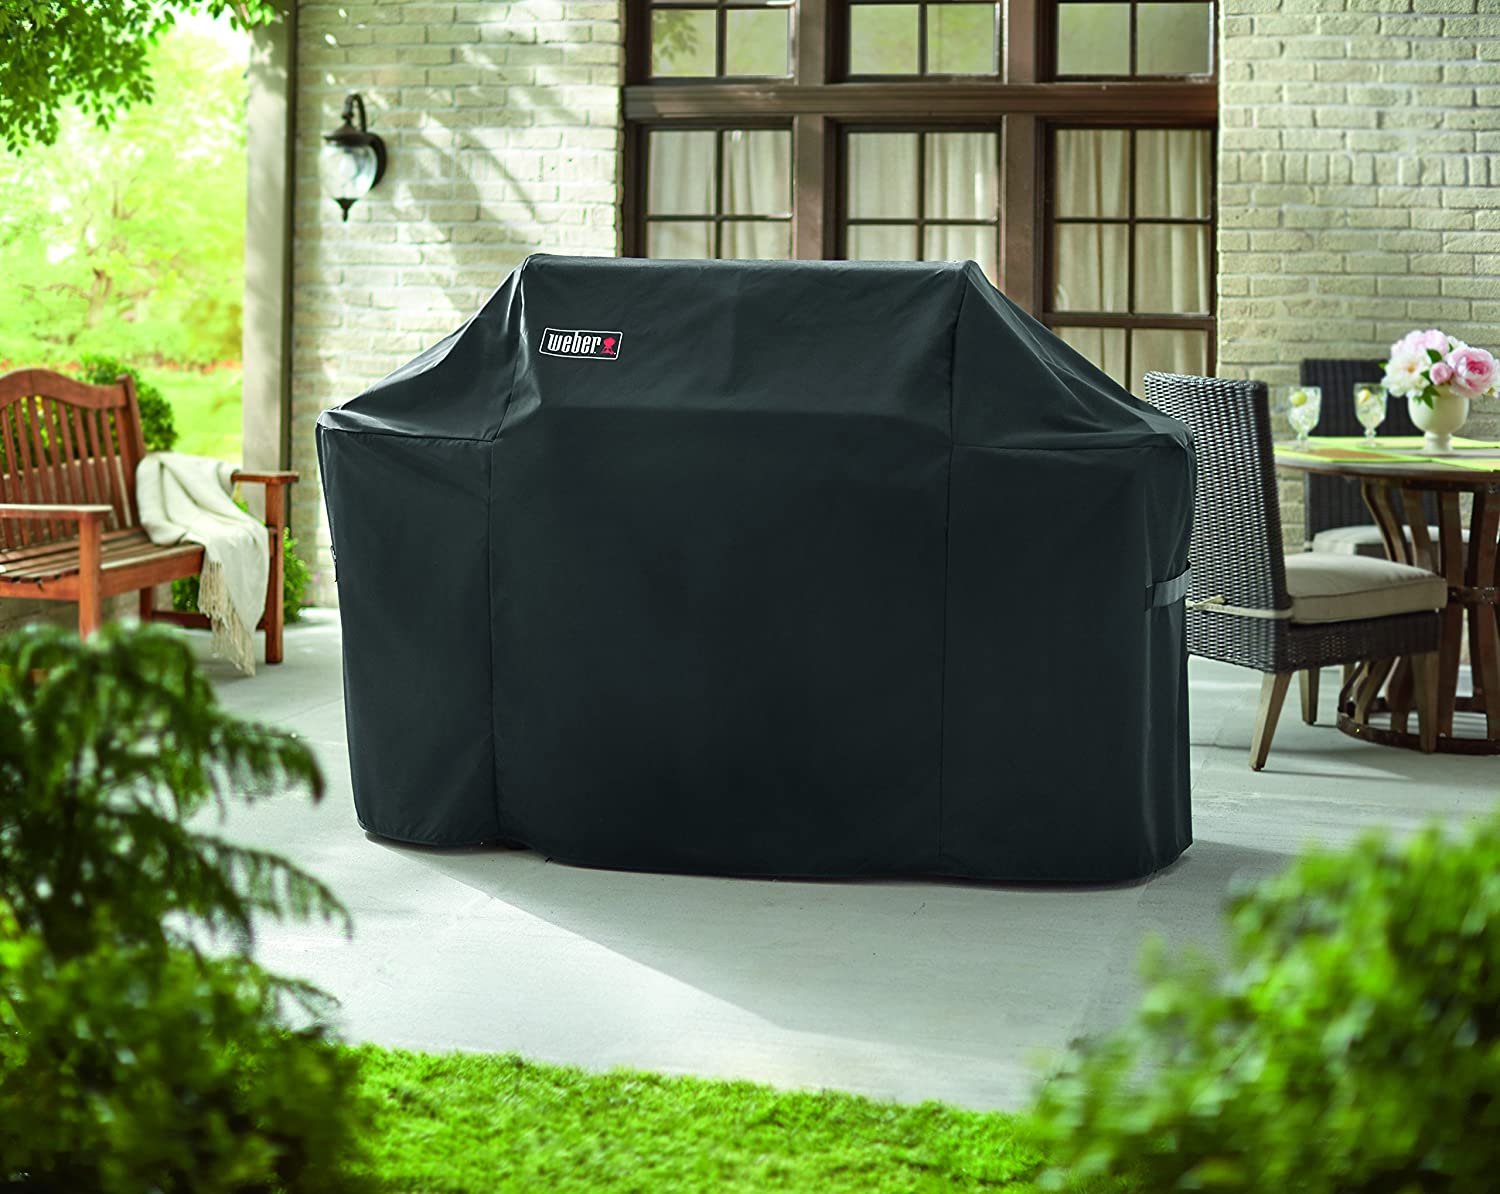 Weber 7109 Grill Cover with Storage Bag for Summit 600-Series Gas Grills,Black - image 4 of 4